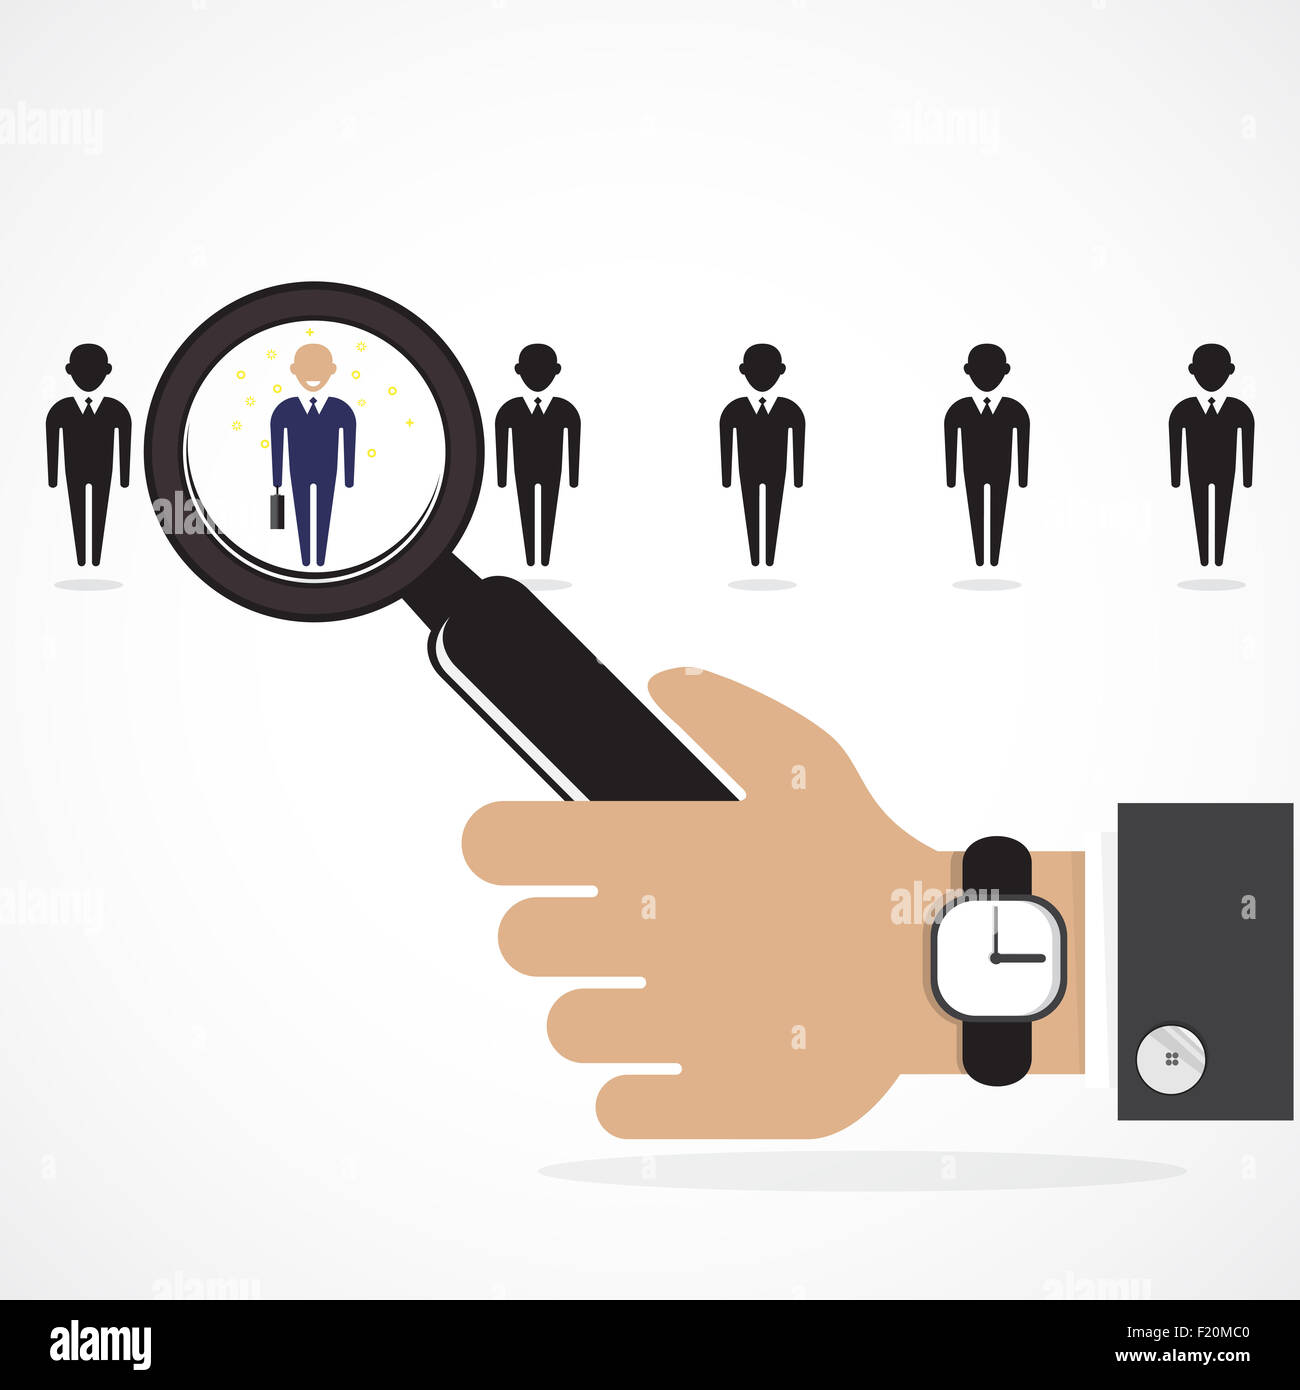 Search for an employee. Looking For Talent. Search for businessman. Businessman standing out from the crowd. Business idea Stock Photo